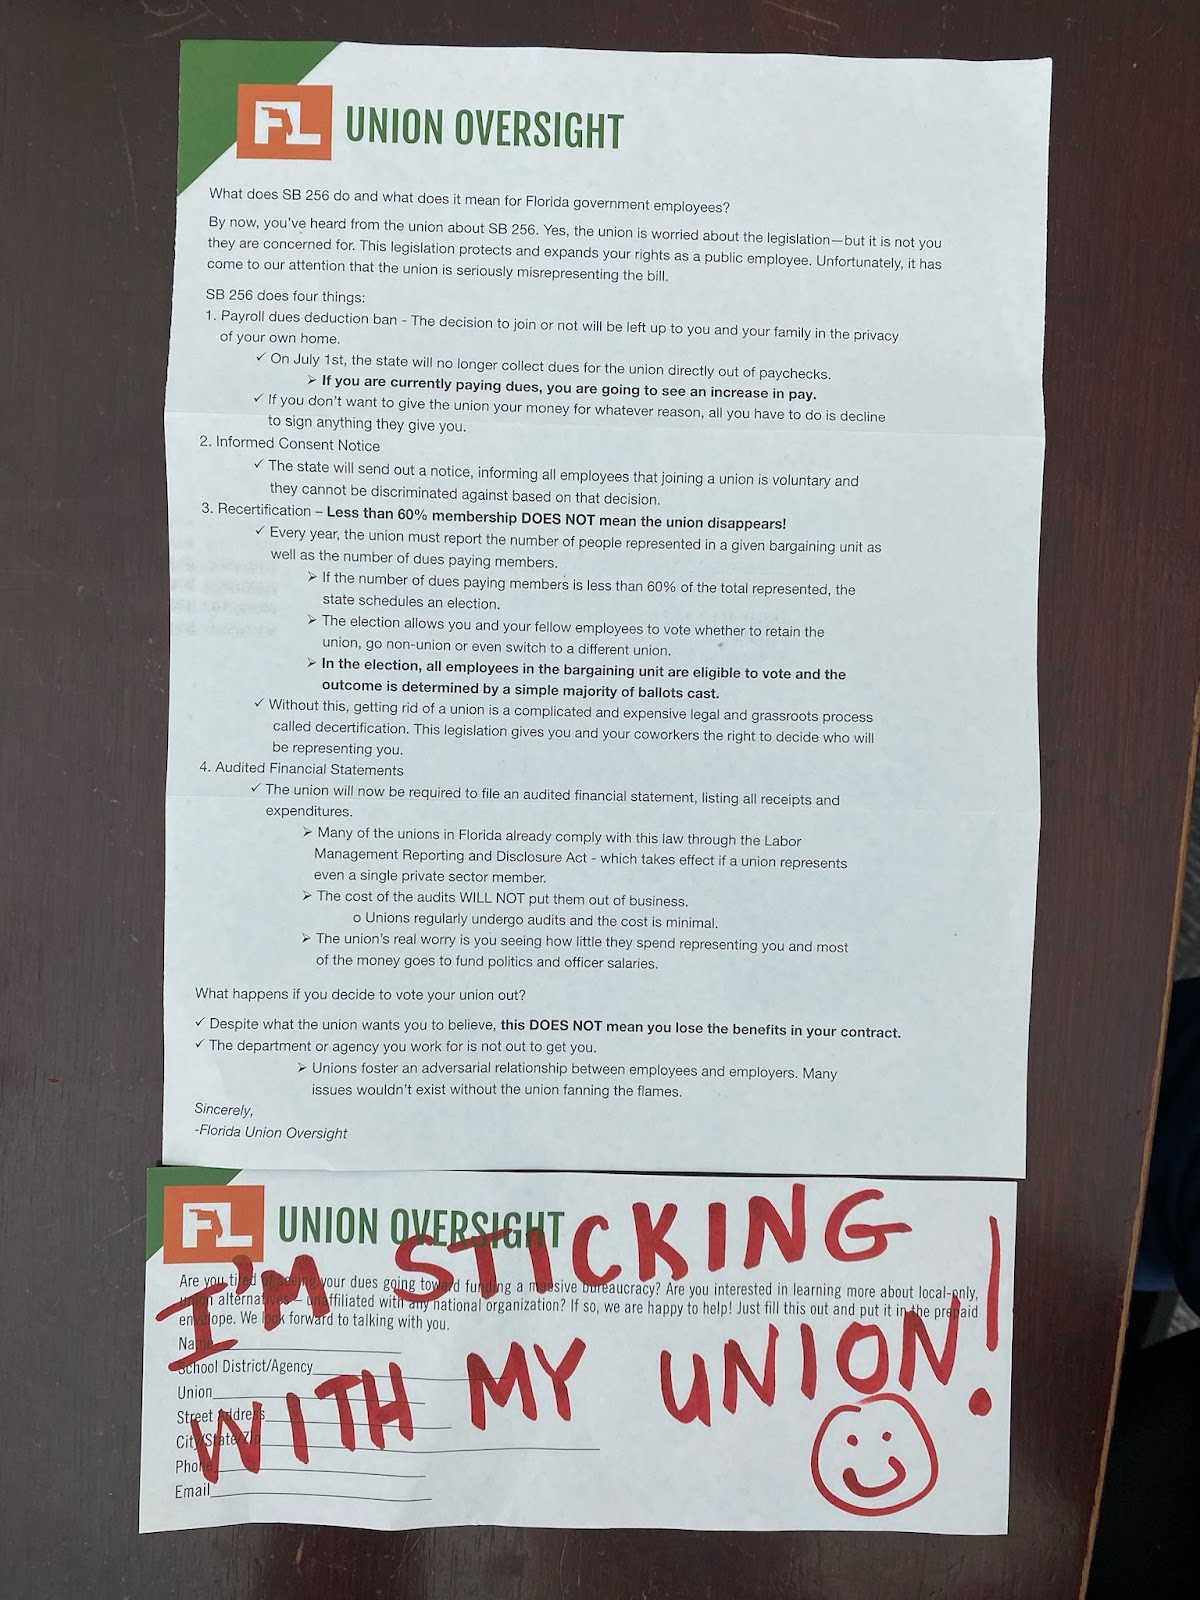 Legal-sized white flier from FL Union Oversight, with green heading, listing provisions of SB 256 and including a detachable form at the bottom for more information. "I'm Sticking With My Union! (smiley face)" is handwritten in red marker.